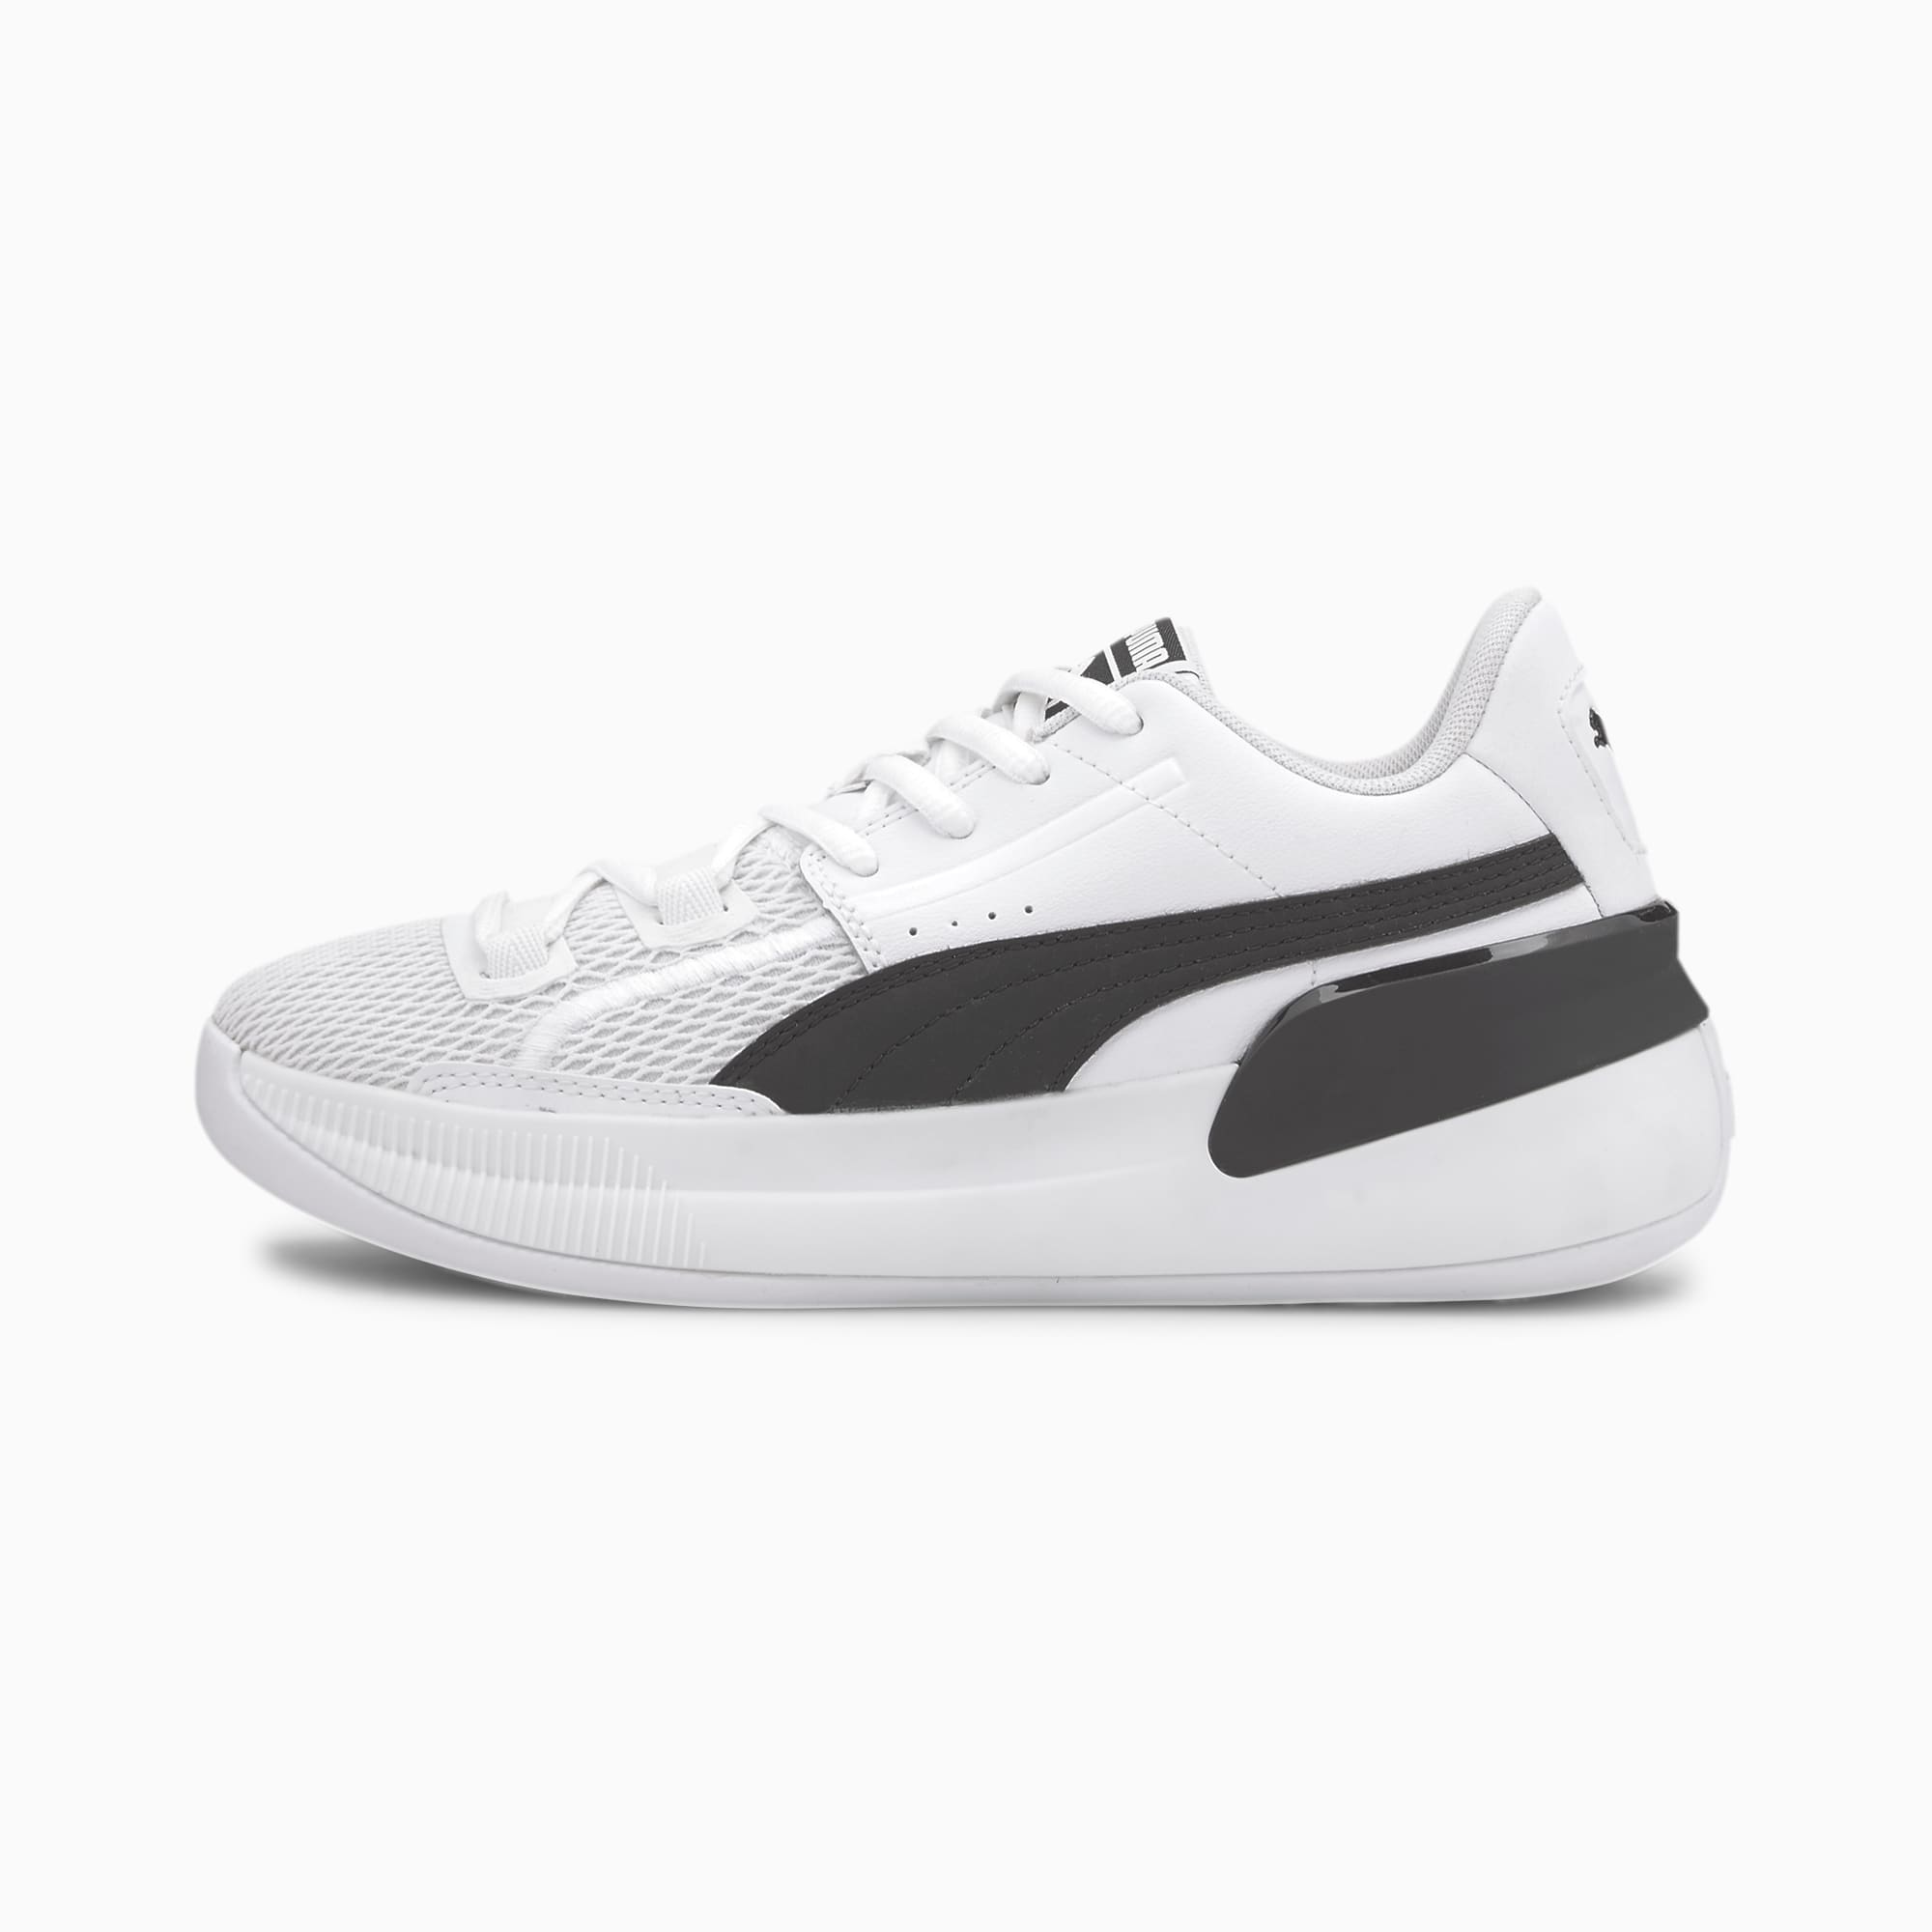 Clyde Hardwood Team Youth Shoes | black | PUMA